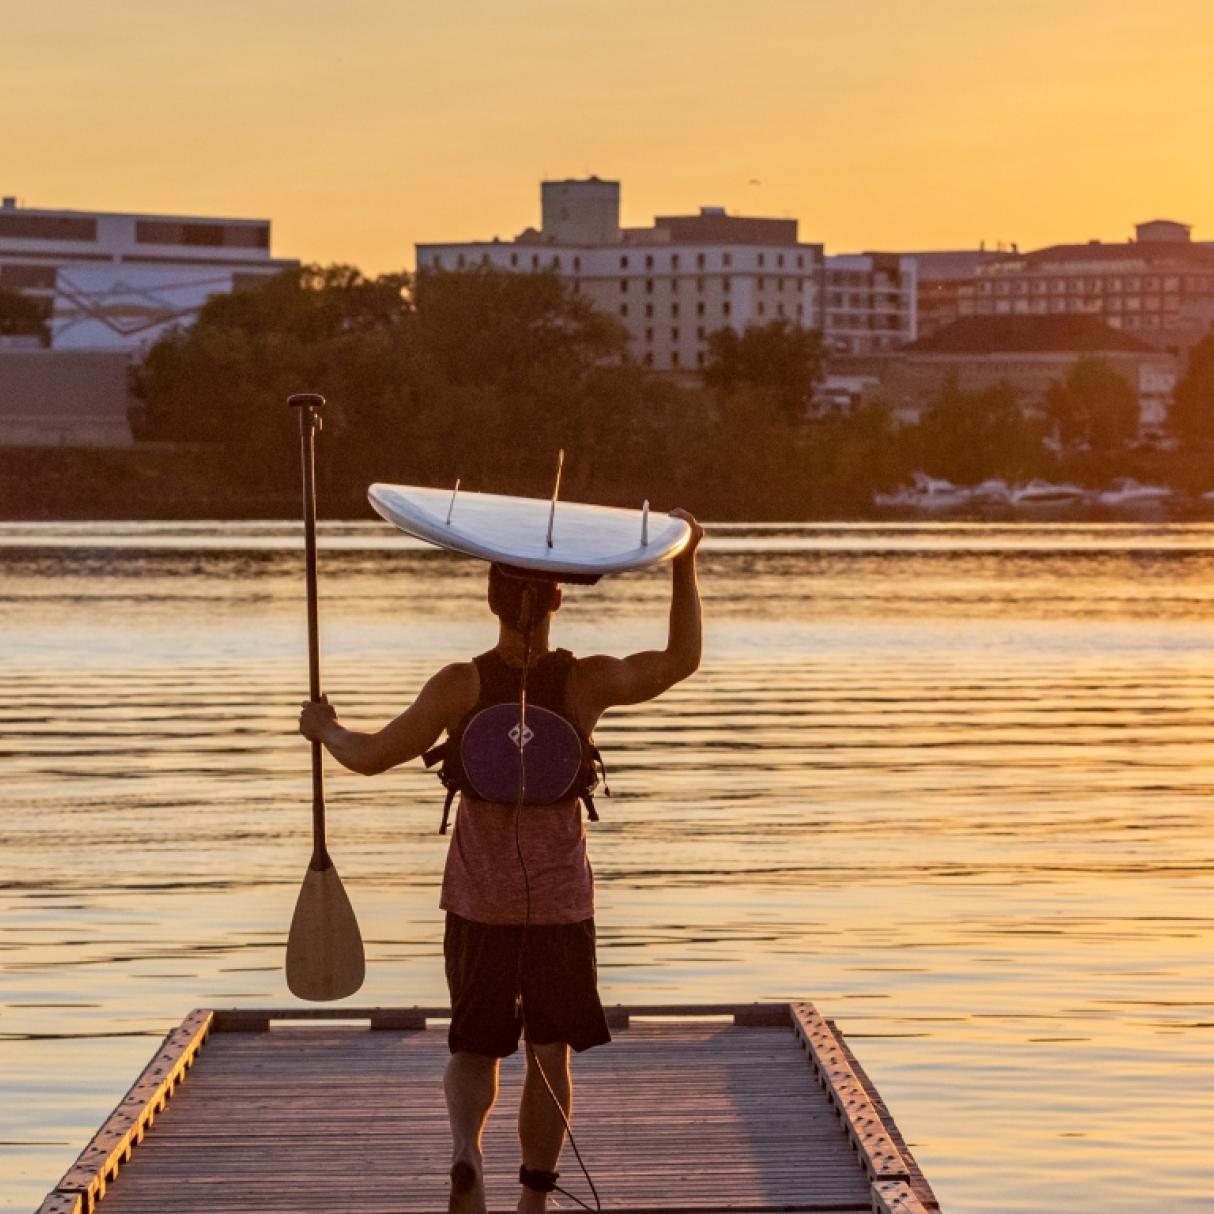 A person prepares to launch their paddleboard at dawn in Fredericton